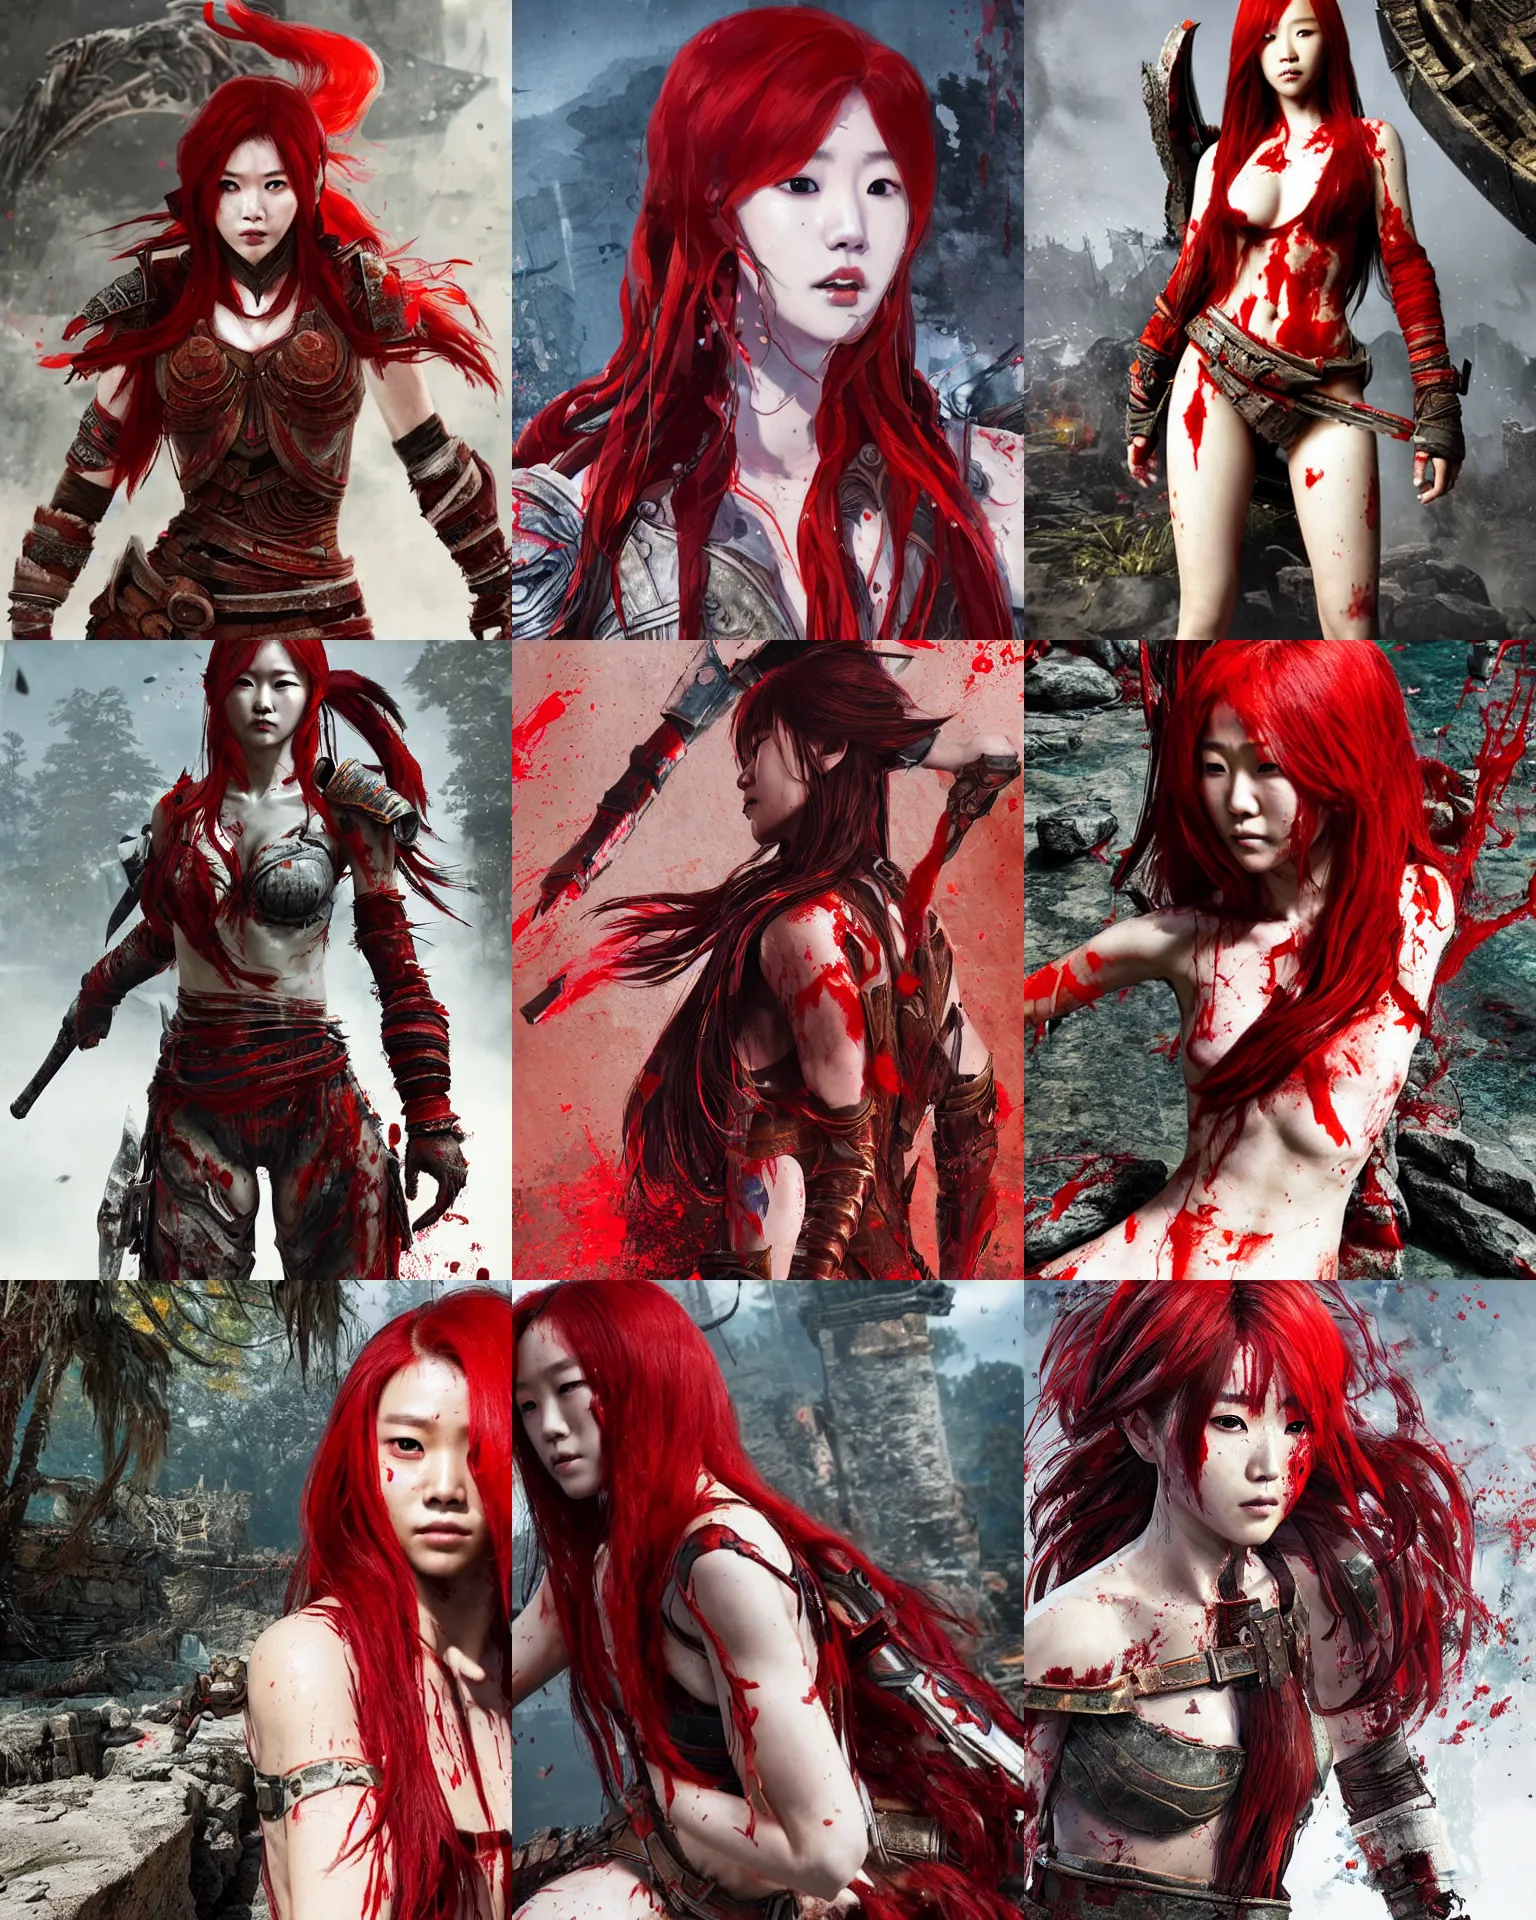 Prompt: lee jin - eun with red long hair in high - end damaged battle suit emerging from pool of blood in god of war 4 game set in ancient italy by conrad roset, rule of thirds, seductive look, beautiful